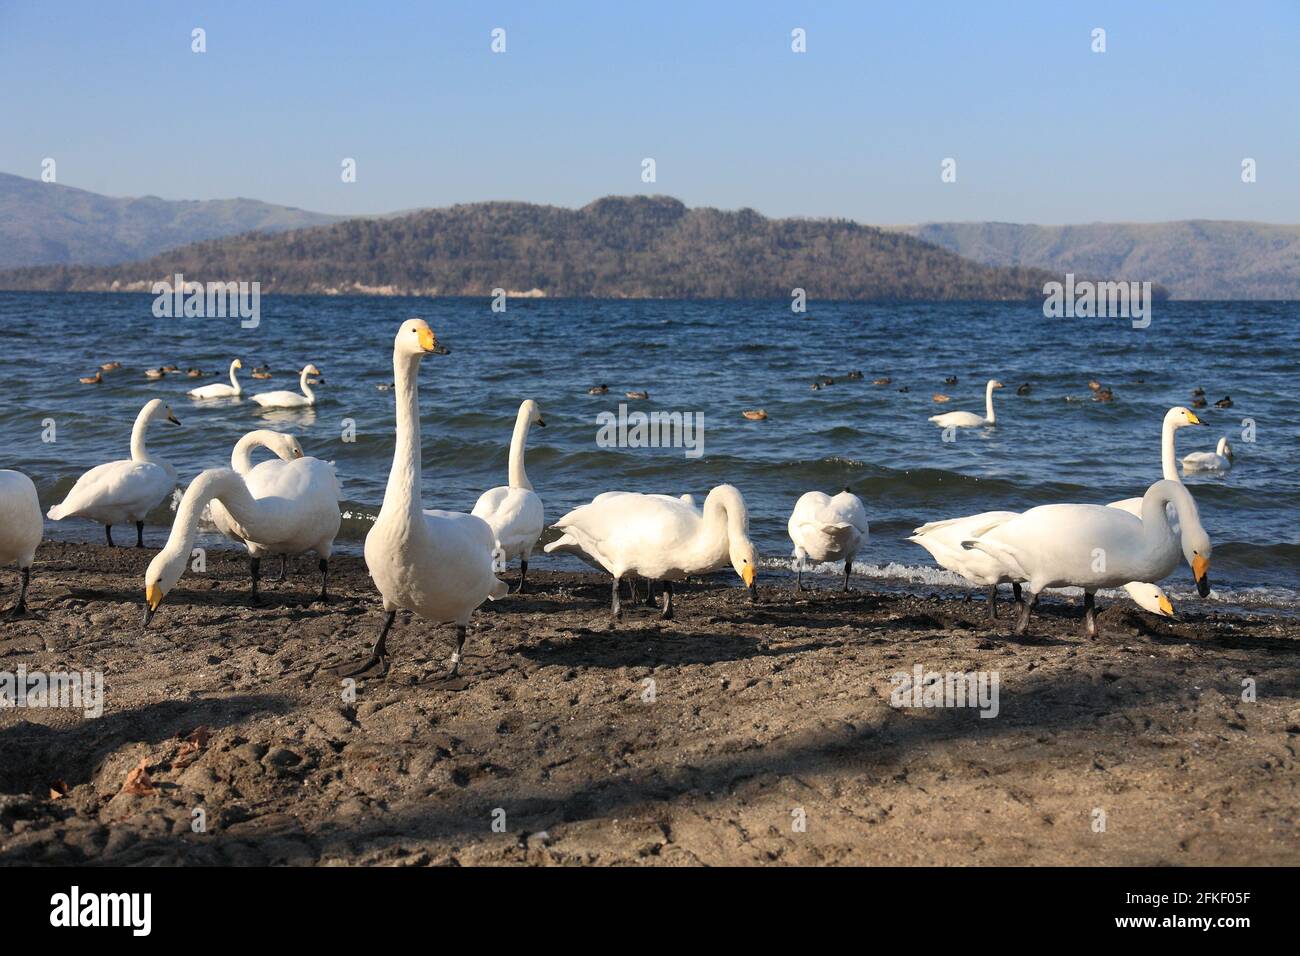 many beautiful white swans standing by a lake in the winter Stock Photo